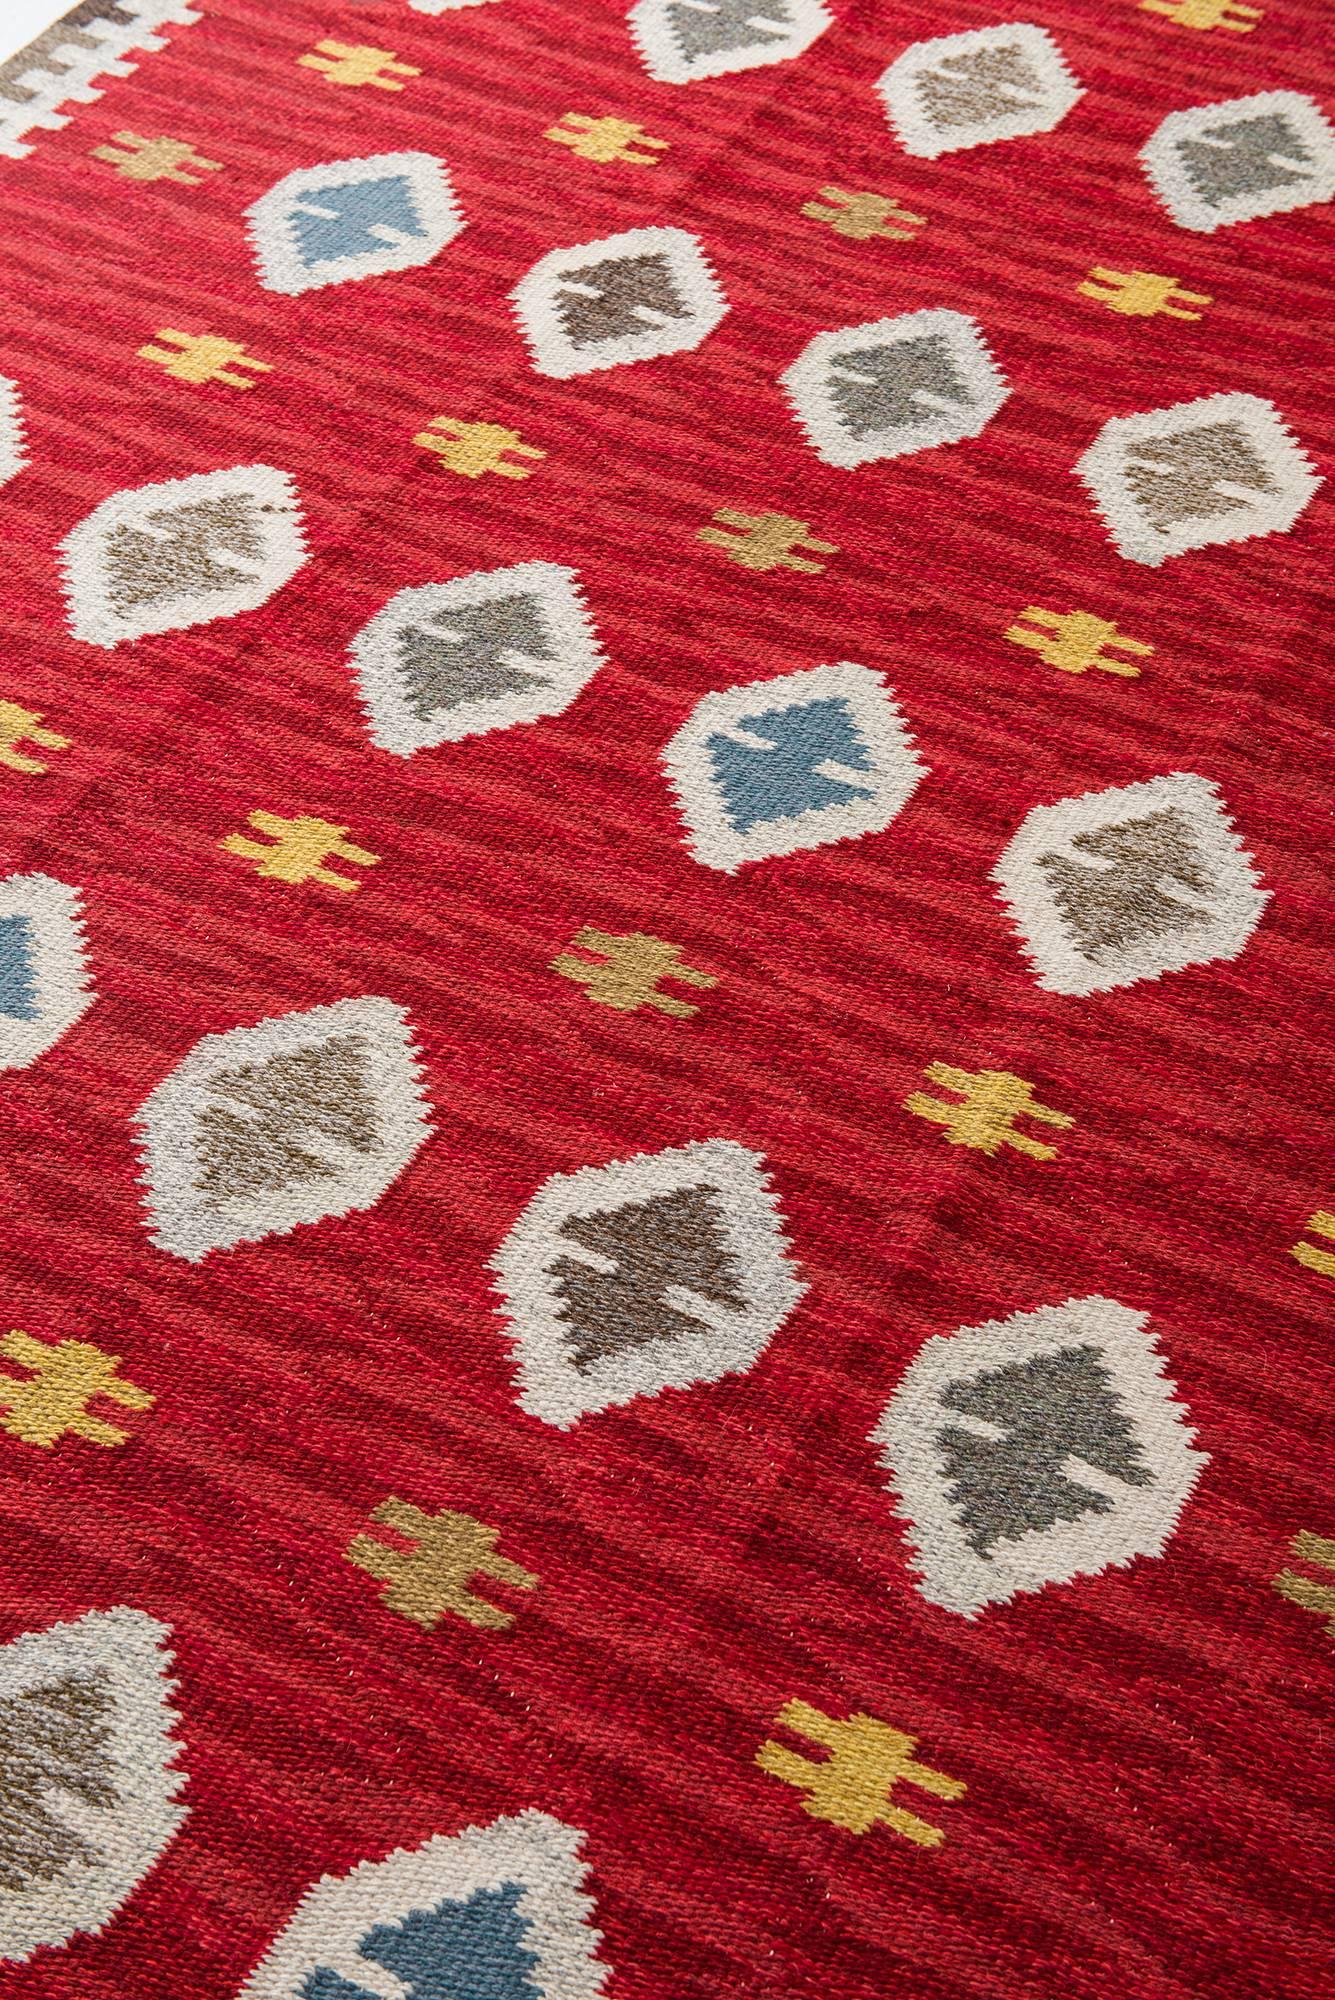 Large Mid-Century carpet. Produced in Sweden. Signed with initials ‘N.I’.